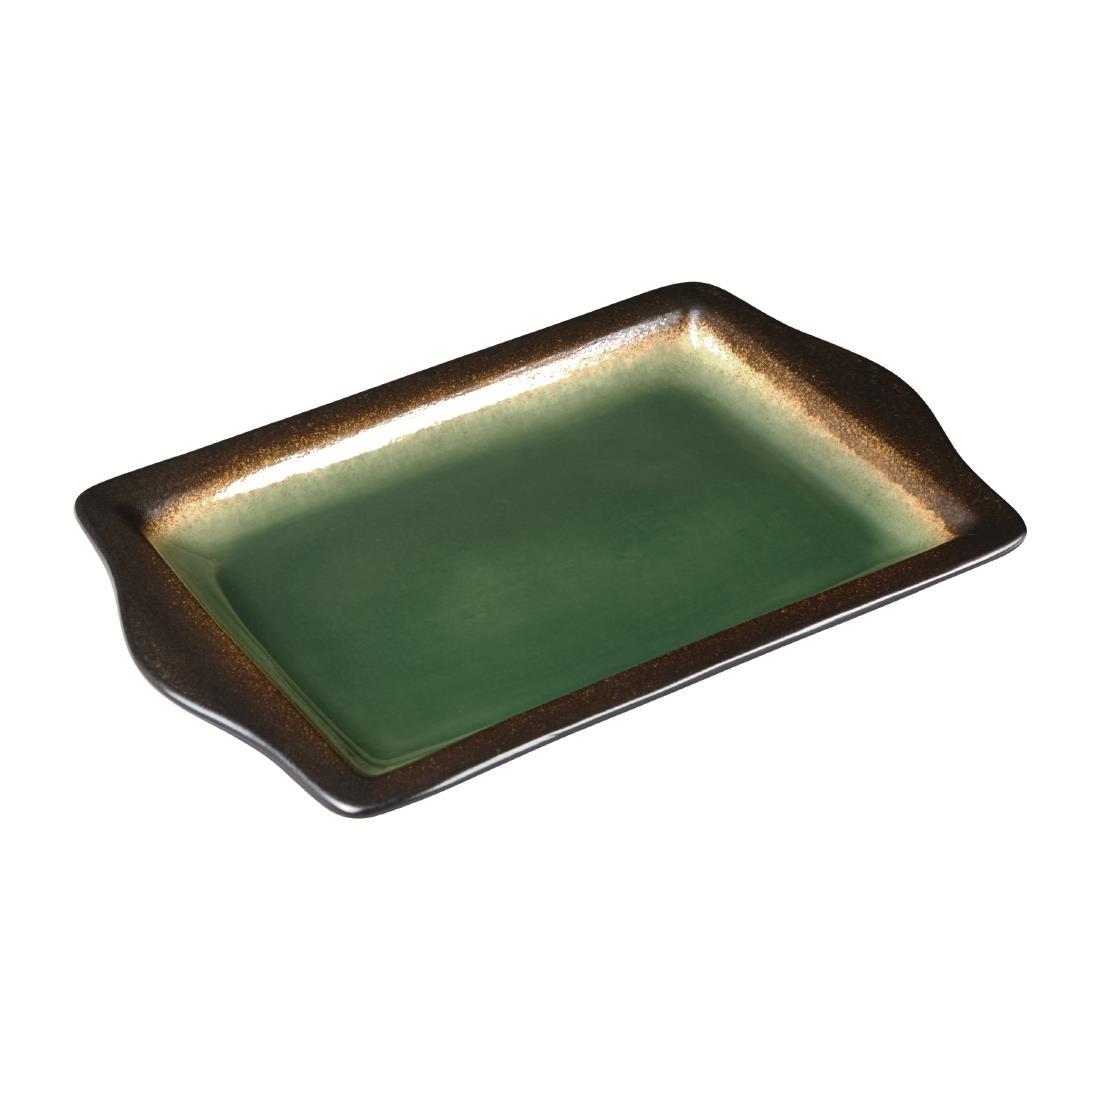 Olympia Nomi Platter Green 283mm (Pack of 6) - HC531  - 2